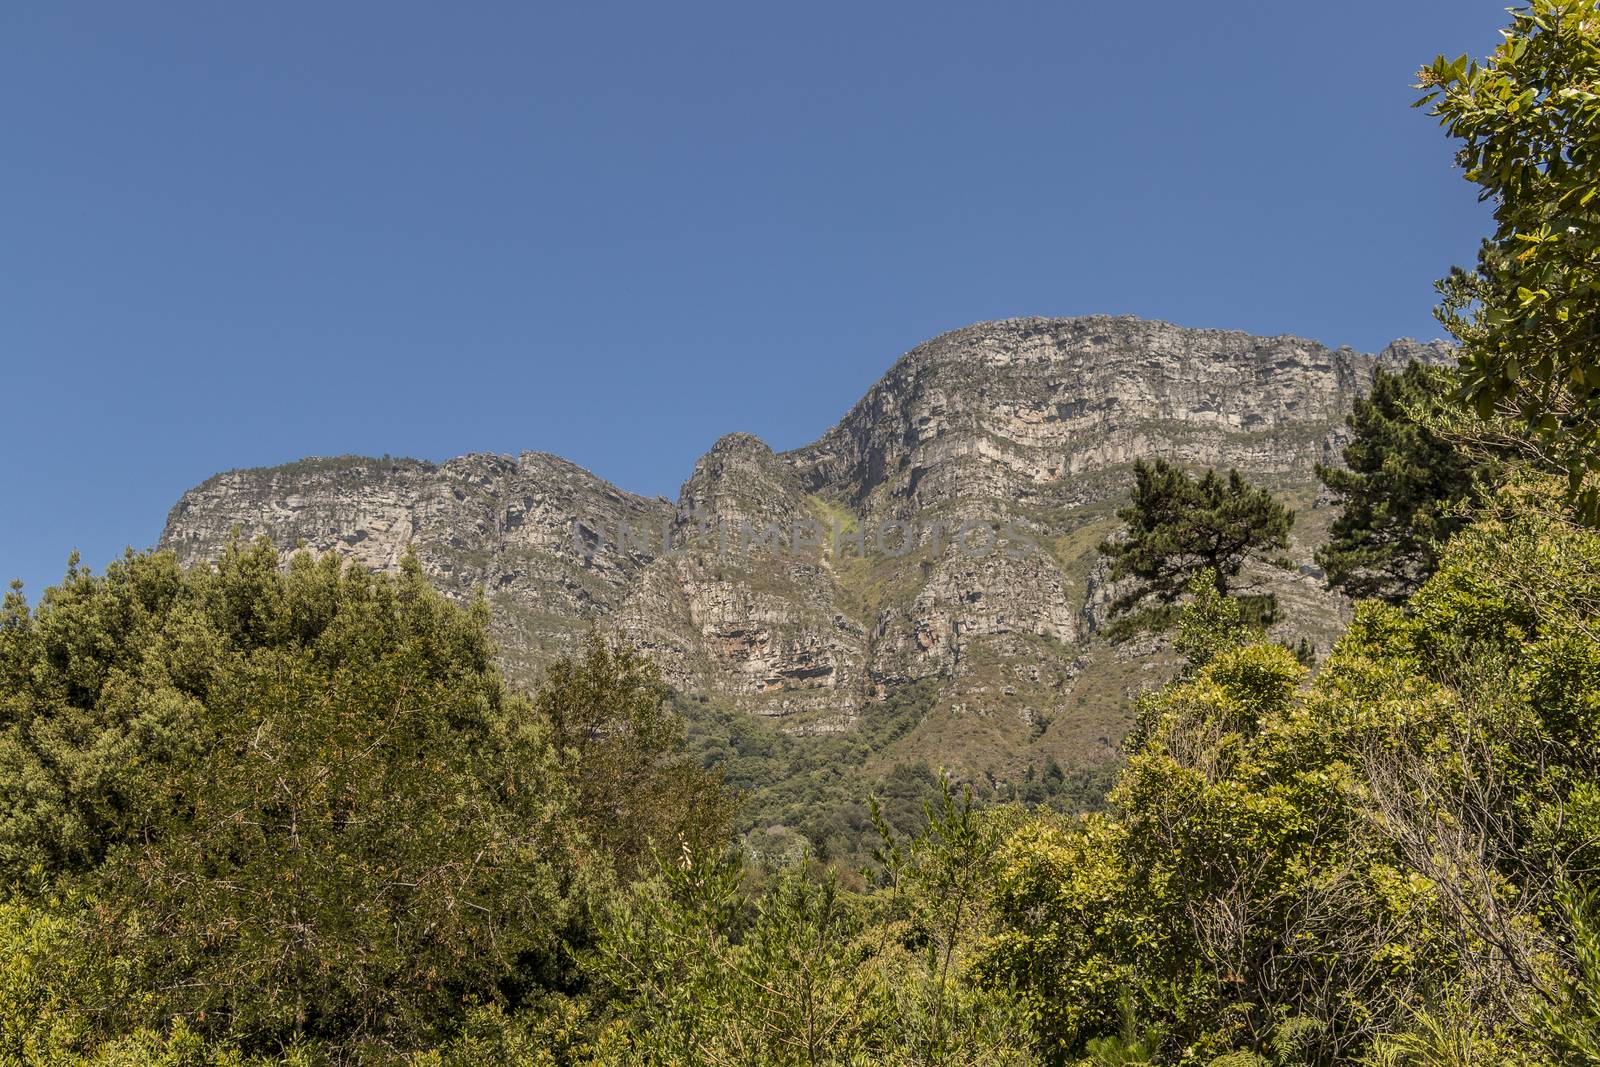 Mountains in the Tablemountain National Park in Cape Town. by Arkadij